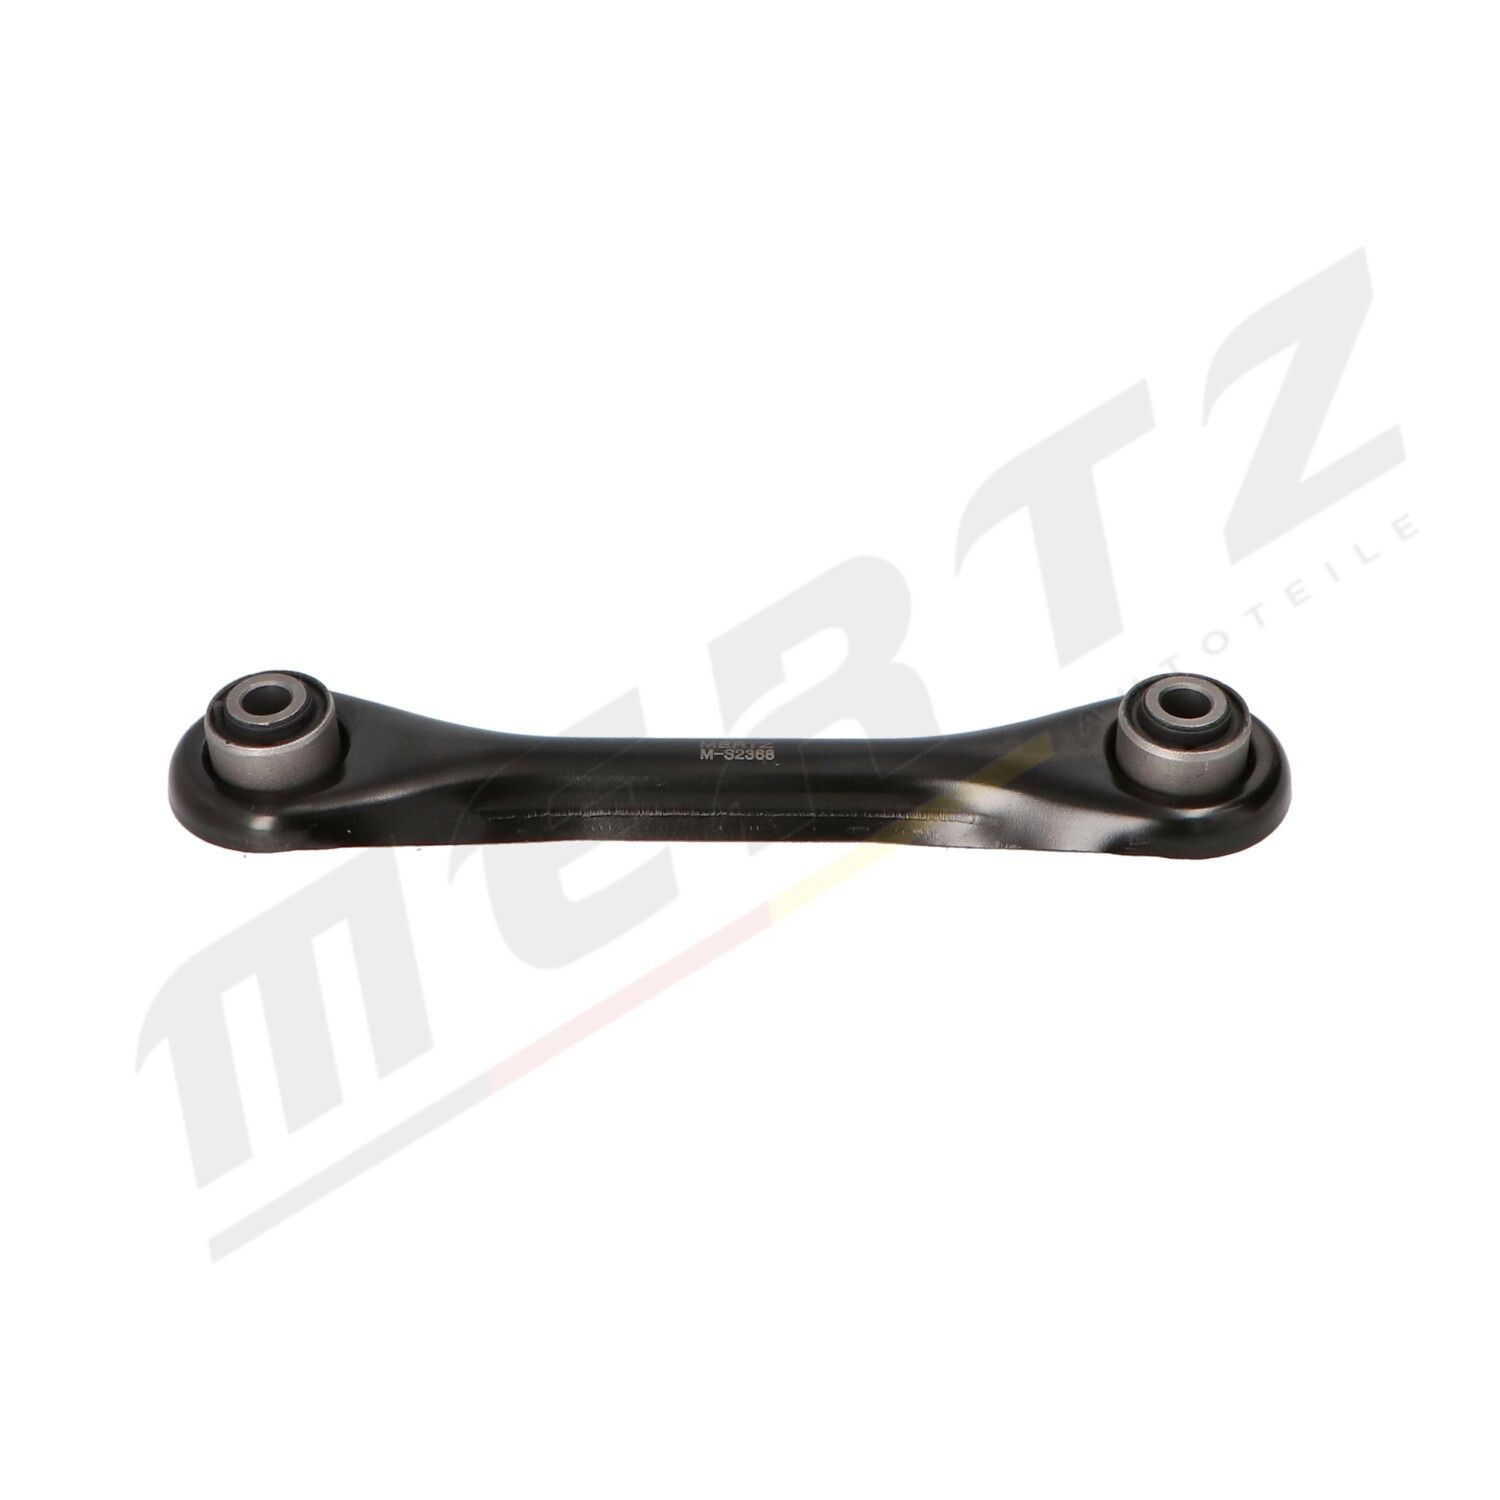 MERTZ with bearing(s), Rear Axle Left, Rear Axle Right, Lower, Control Arm, Sheet Steel Control arm M-S2368 buy